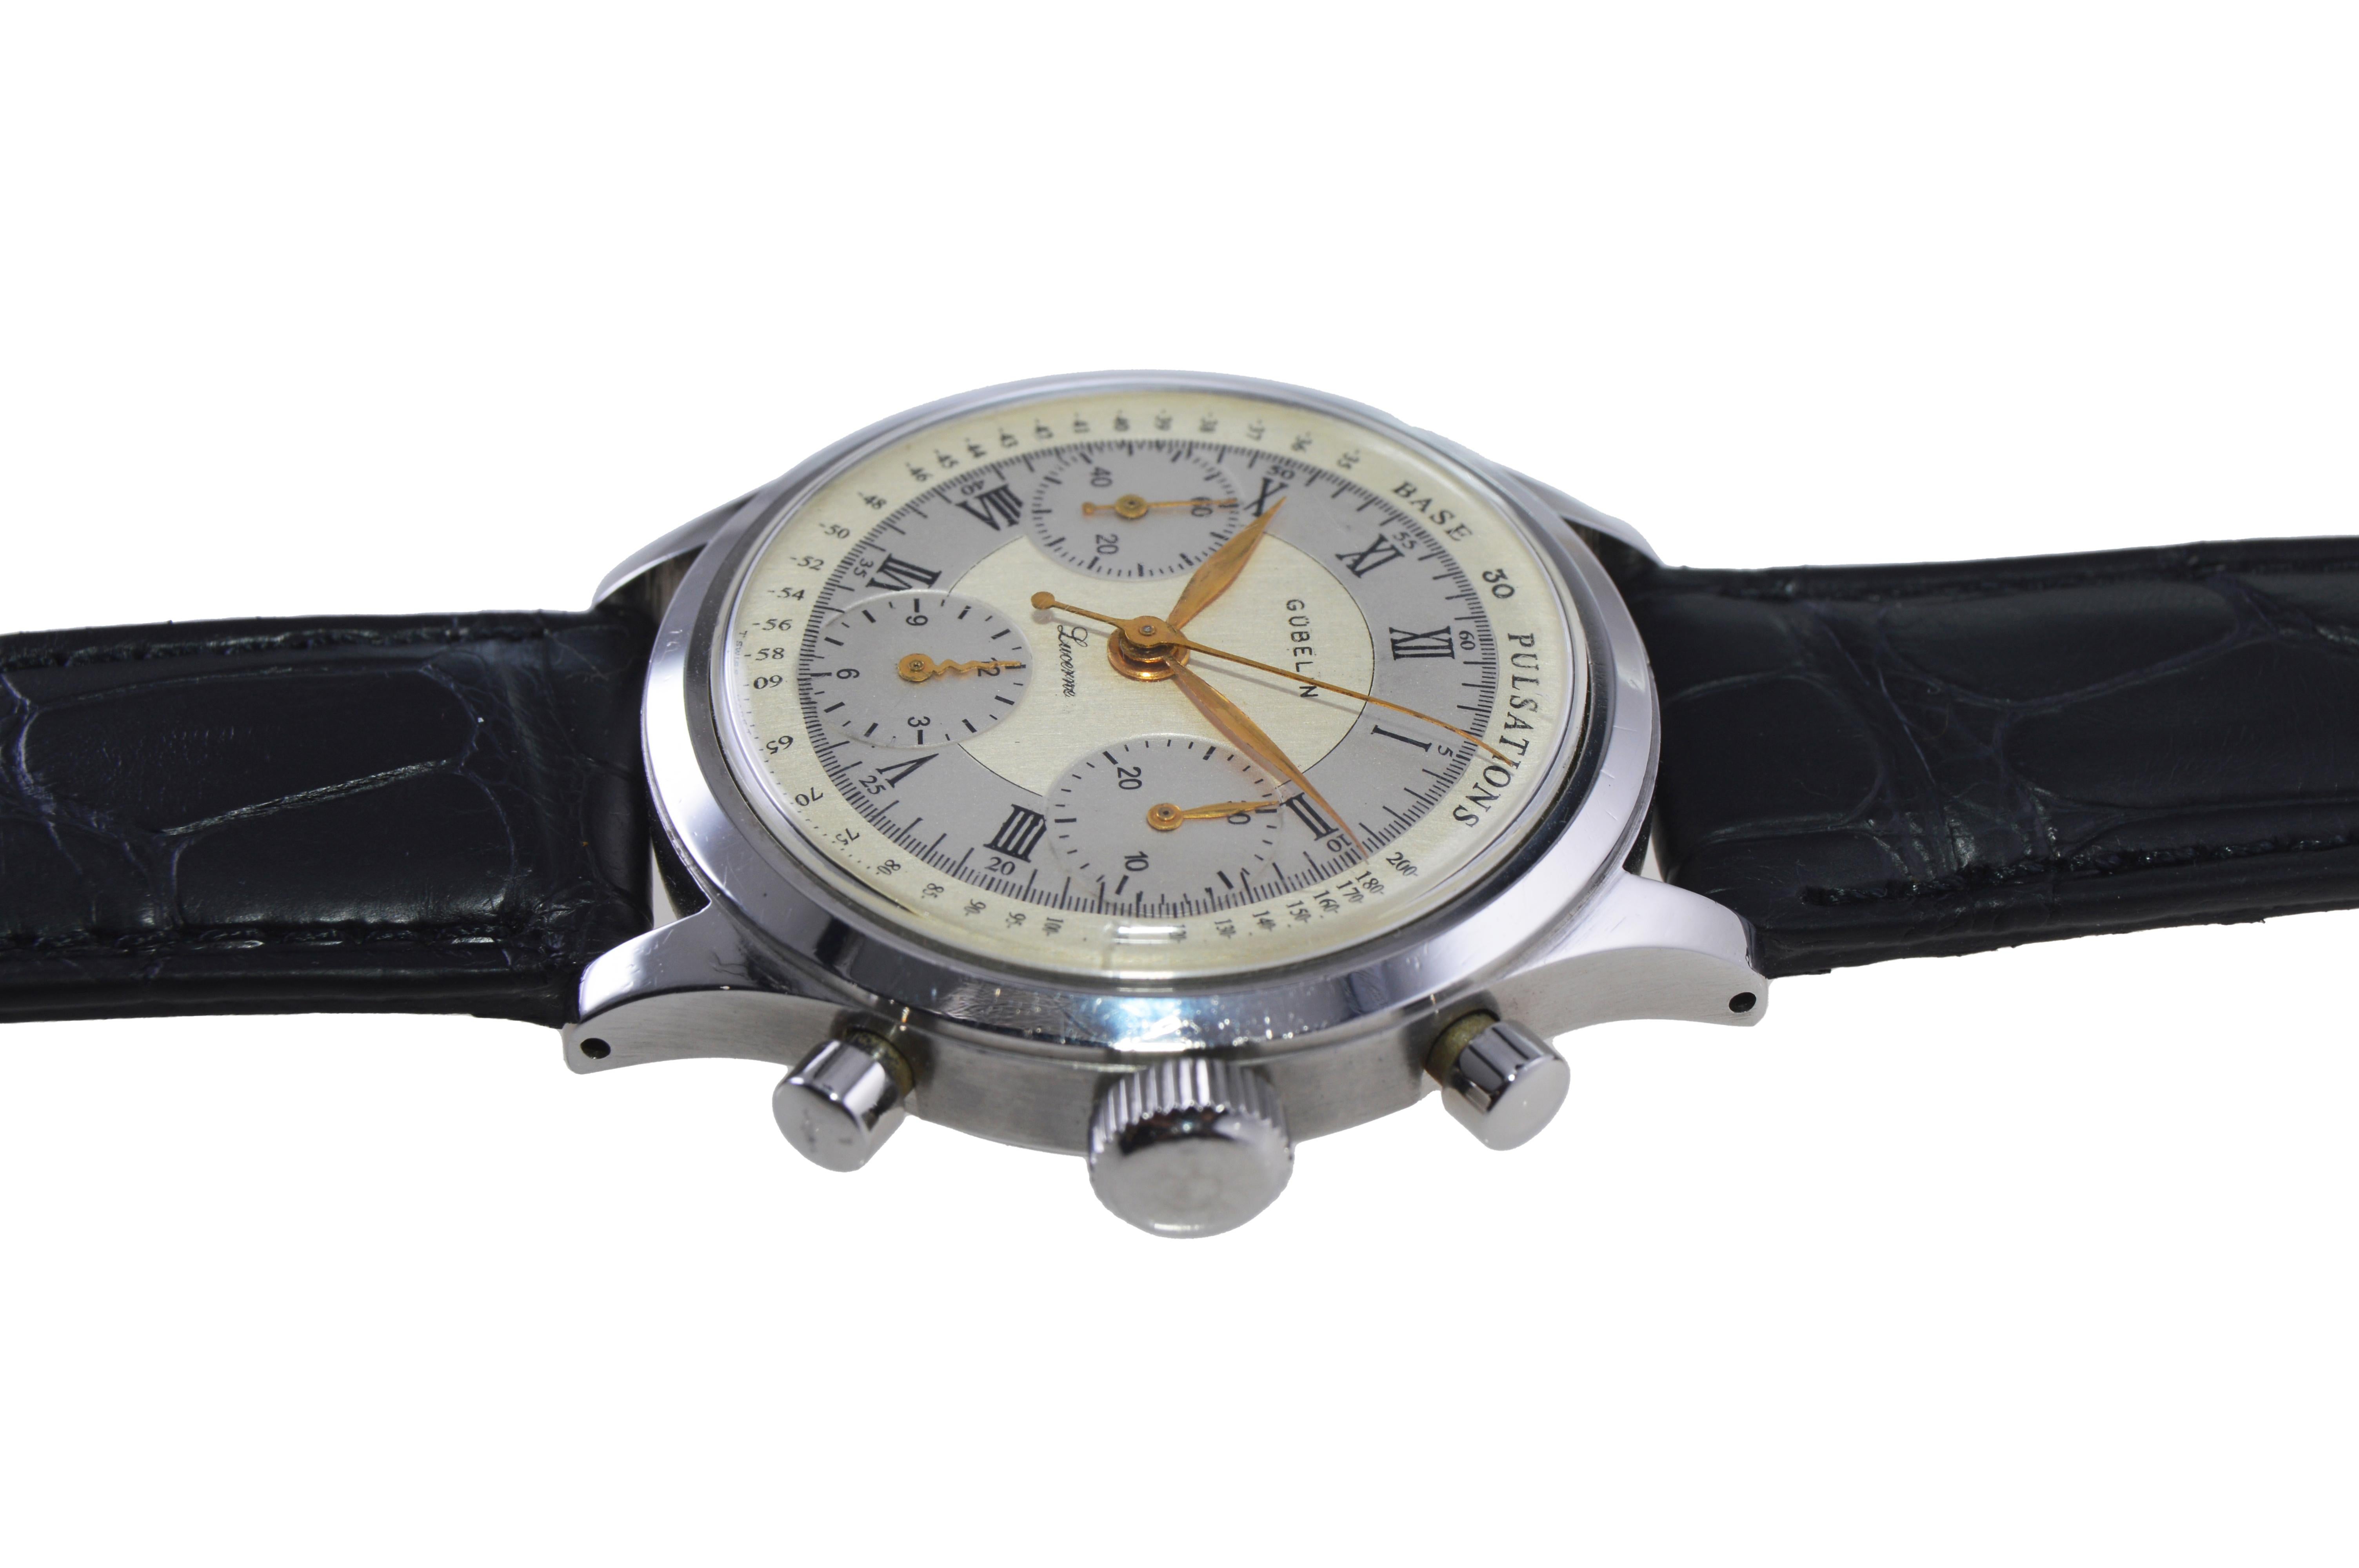 Gubelin Stainless Steel Valjoux 72 Chronograph Doctors Pulsation Watch, 1940s For Sale 3